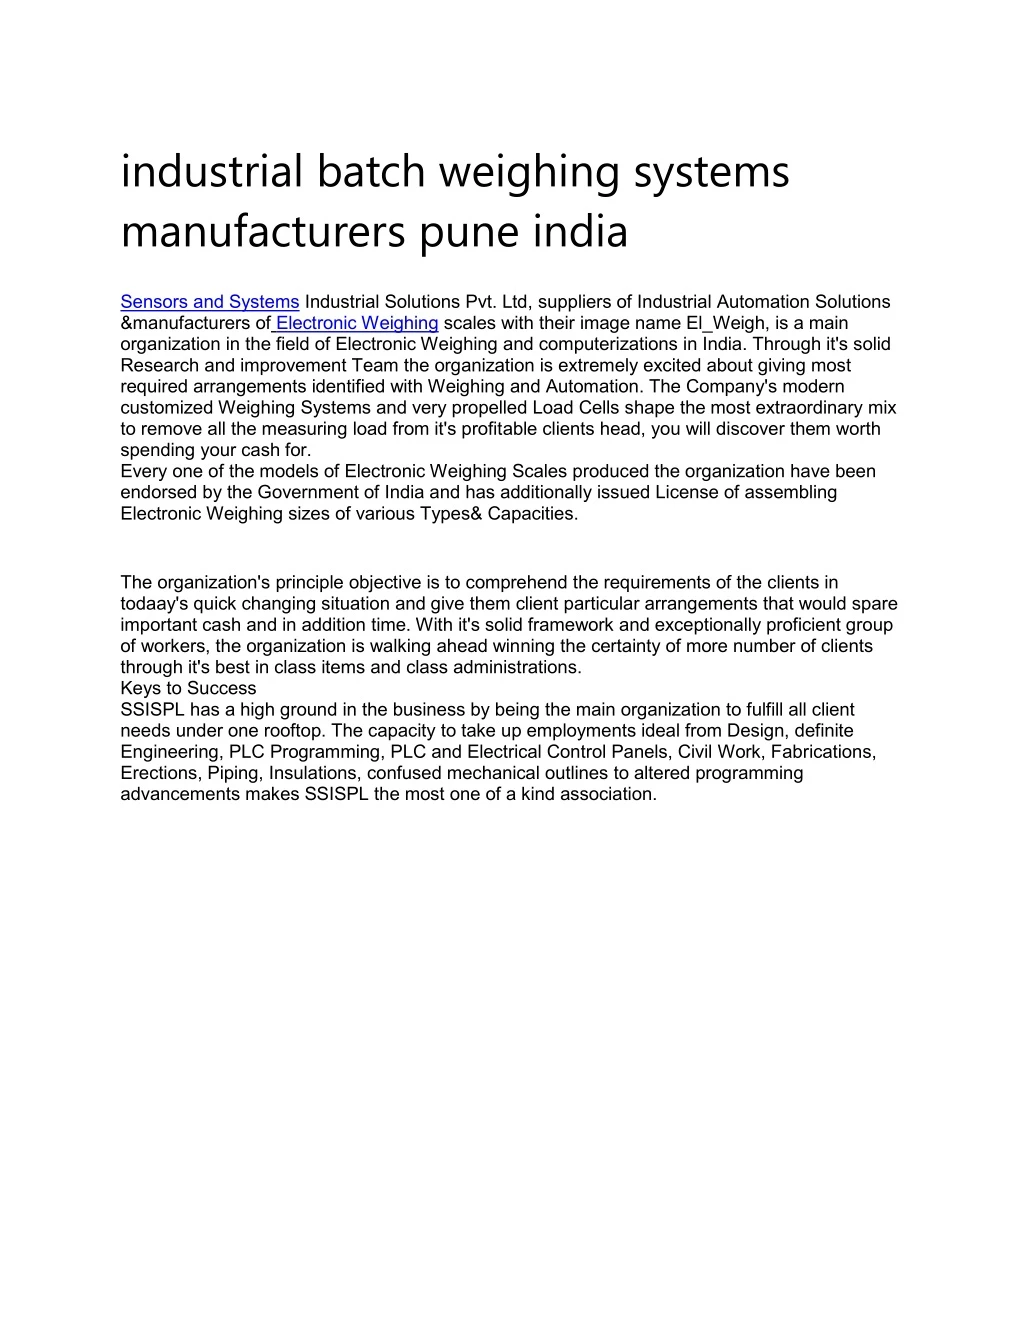 industrial batch weighing systems manufacturers